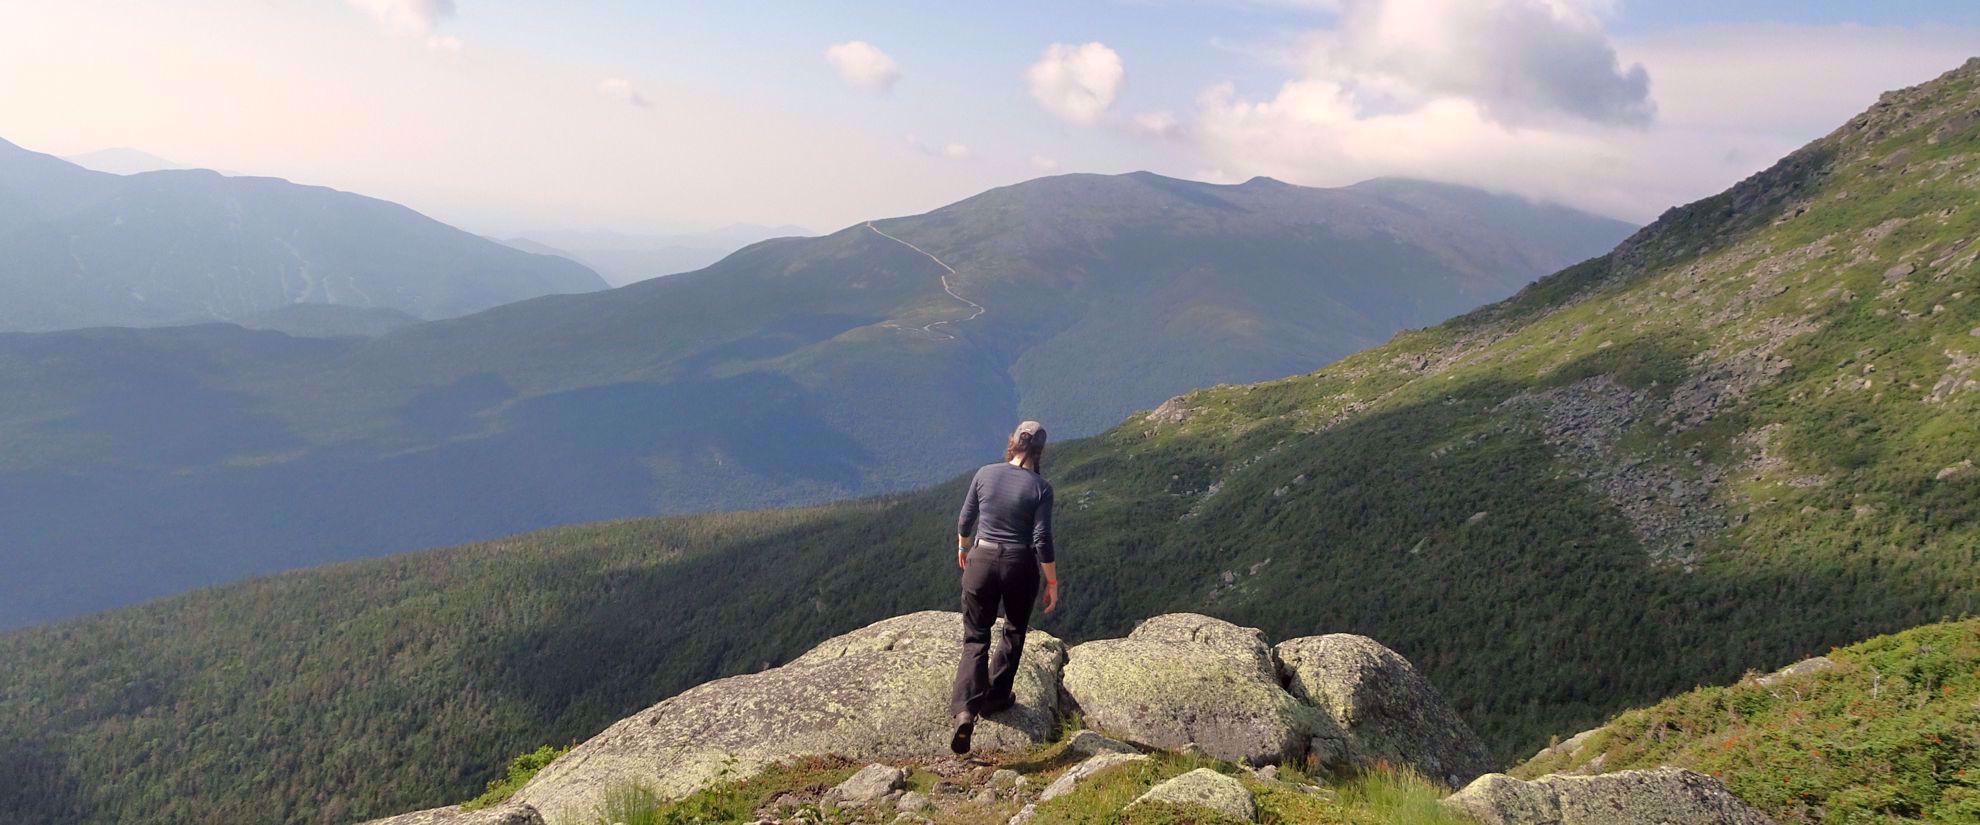 woman on rock enjoys view of valley on appalachian trail